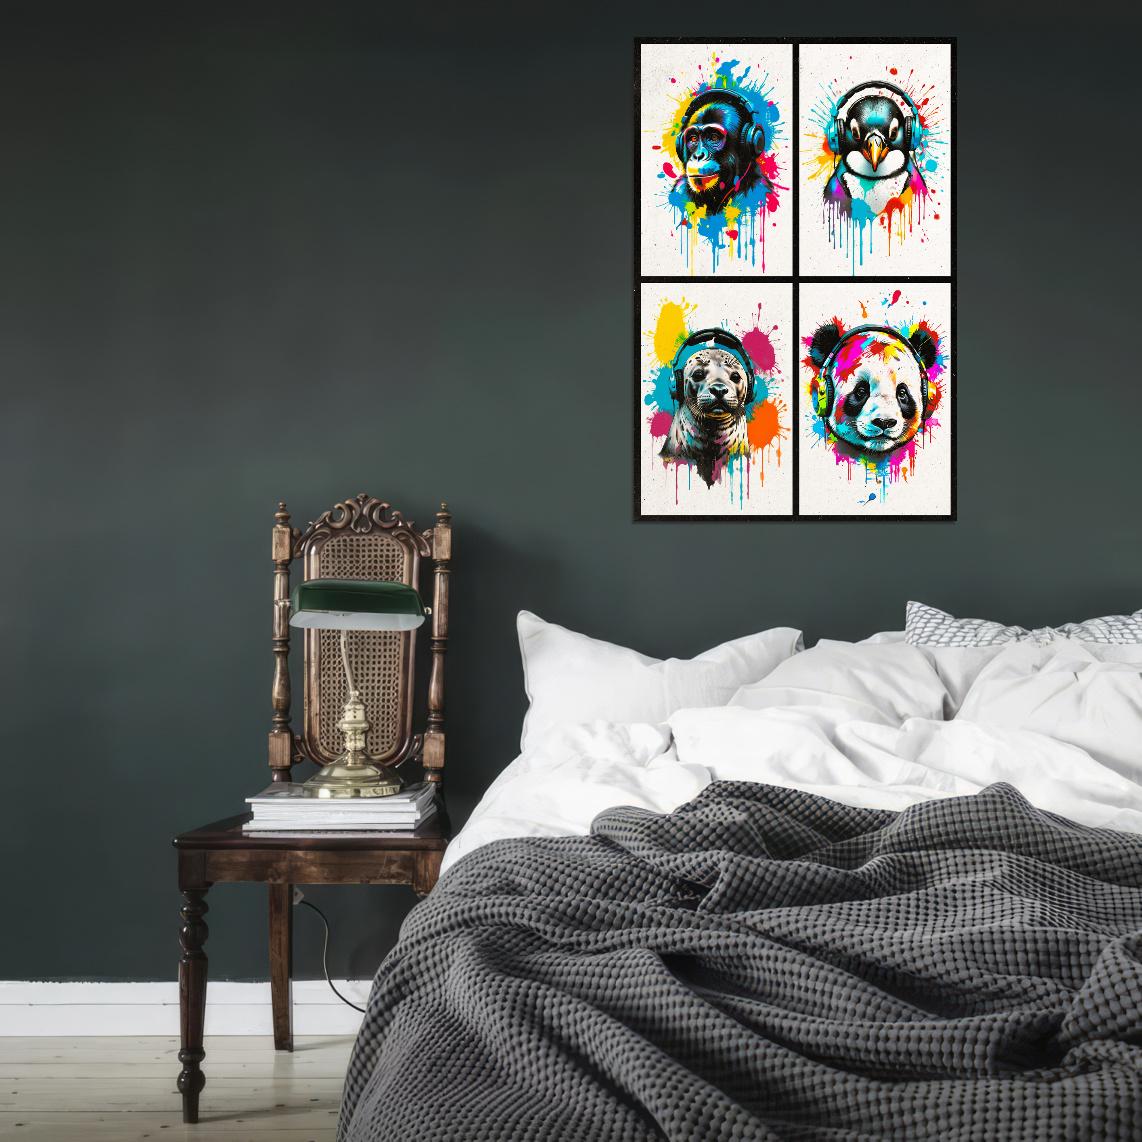 4 Set Animals In Headphones Monkey Penguin Seal Panda Abstract Colorful Art Poster